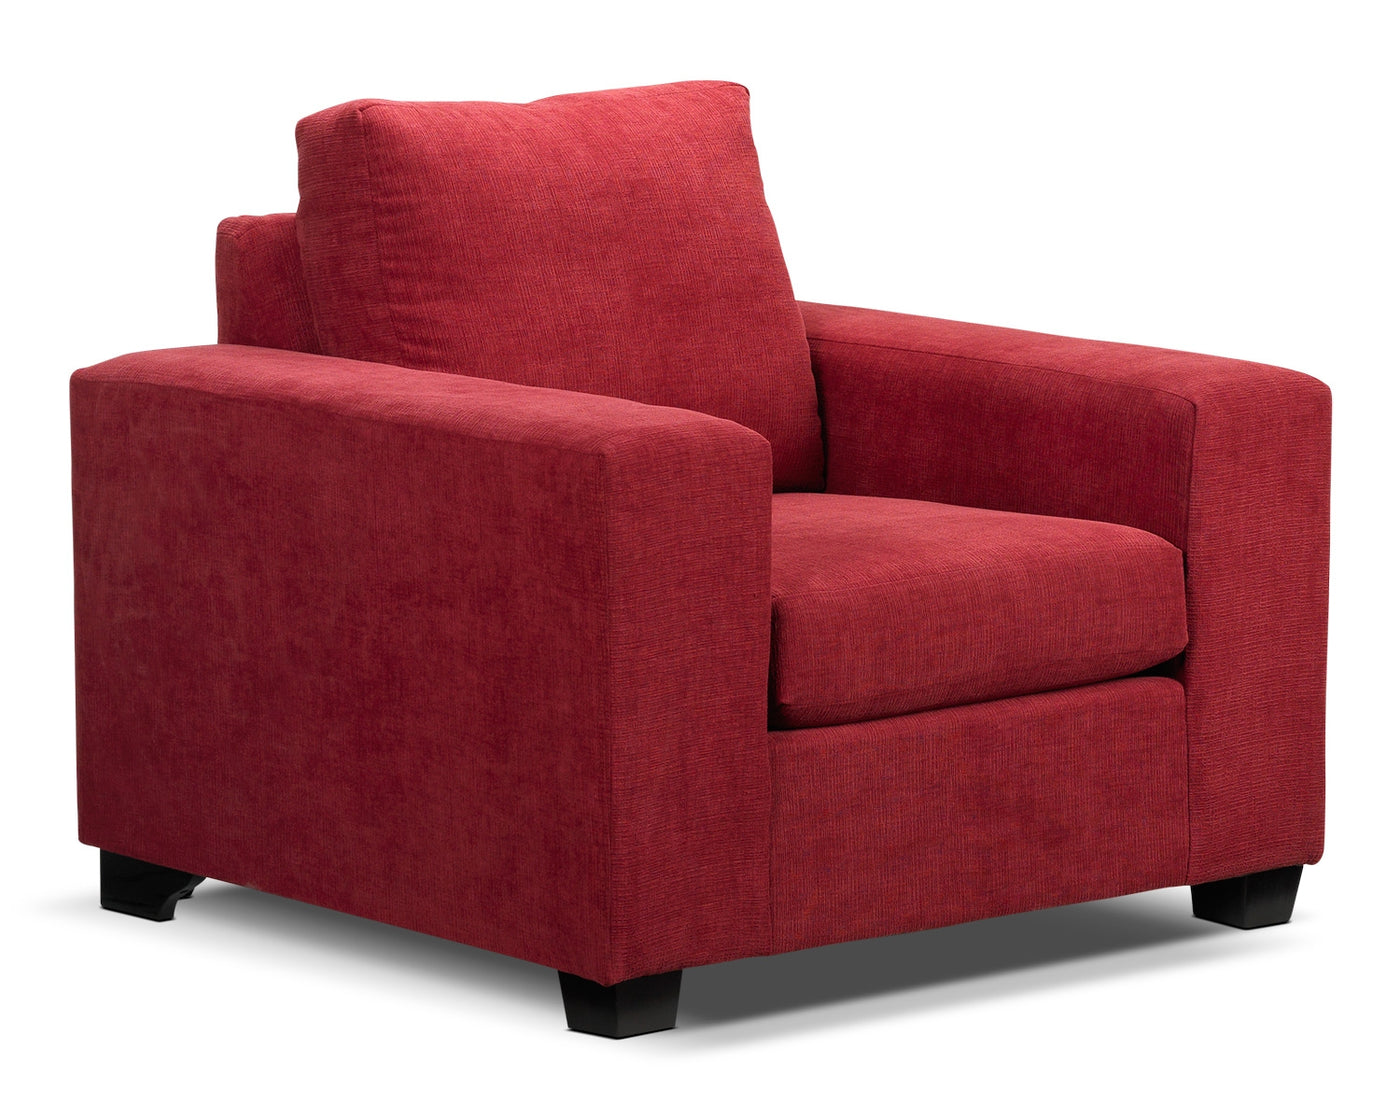 Fava Sofa and Chair Set - Red